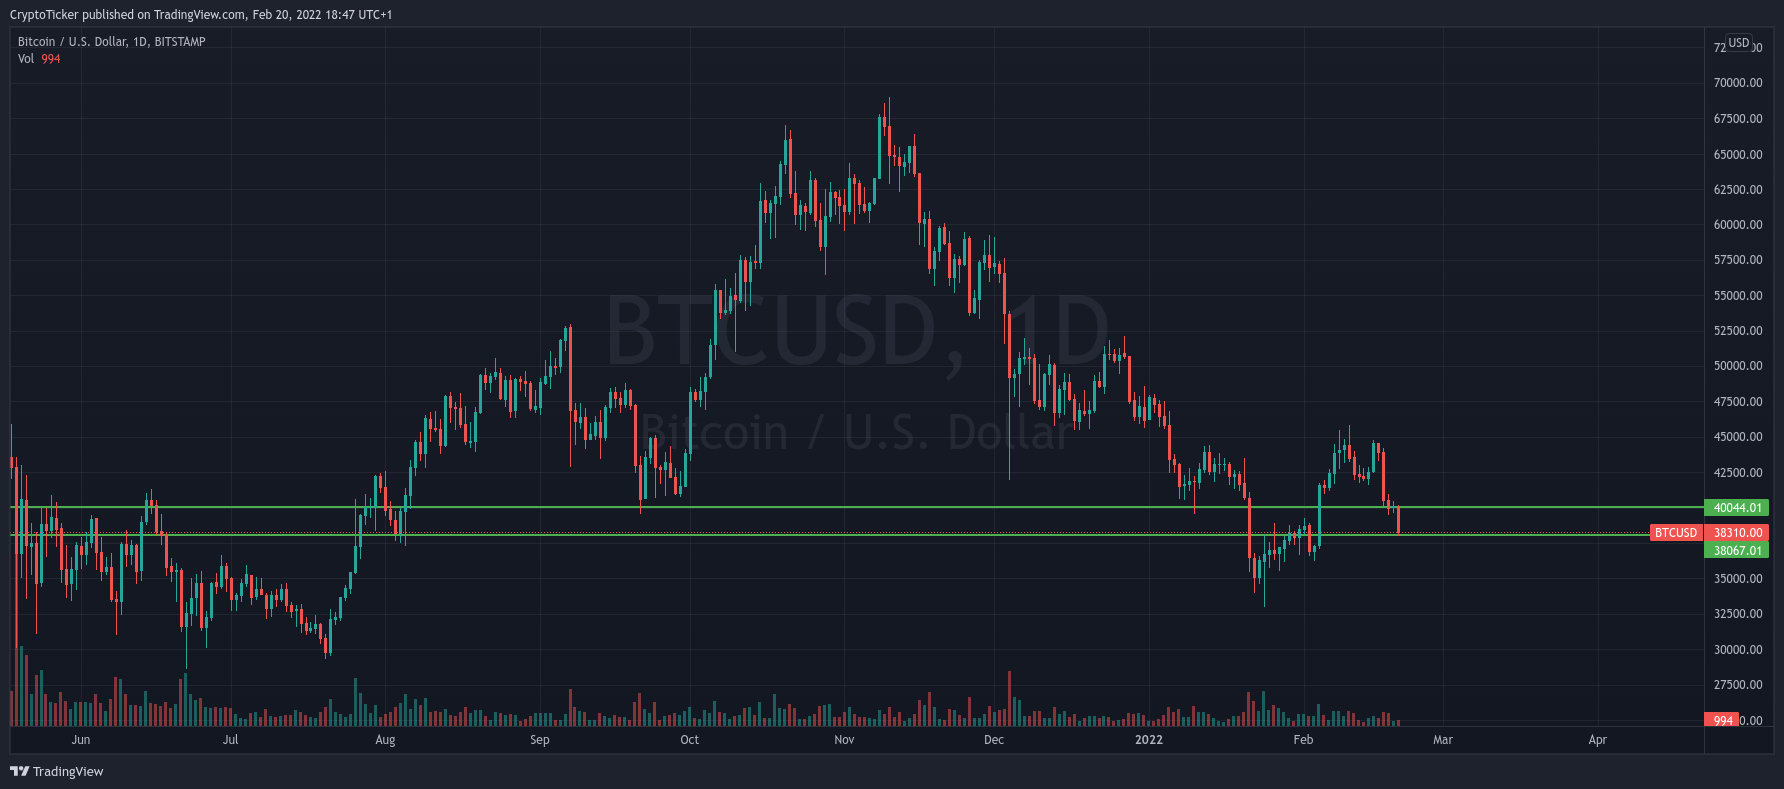 BTC/USD 1-day chart showing the important price area of Bitcoin down